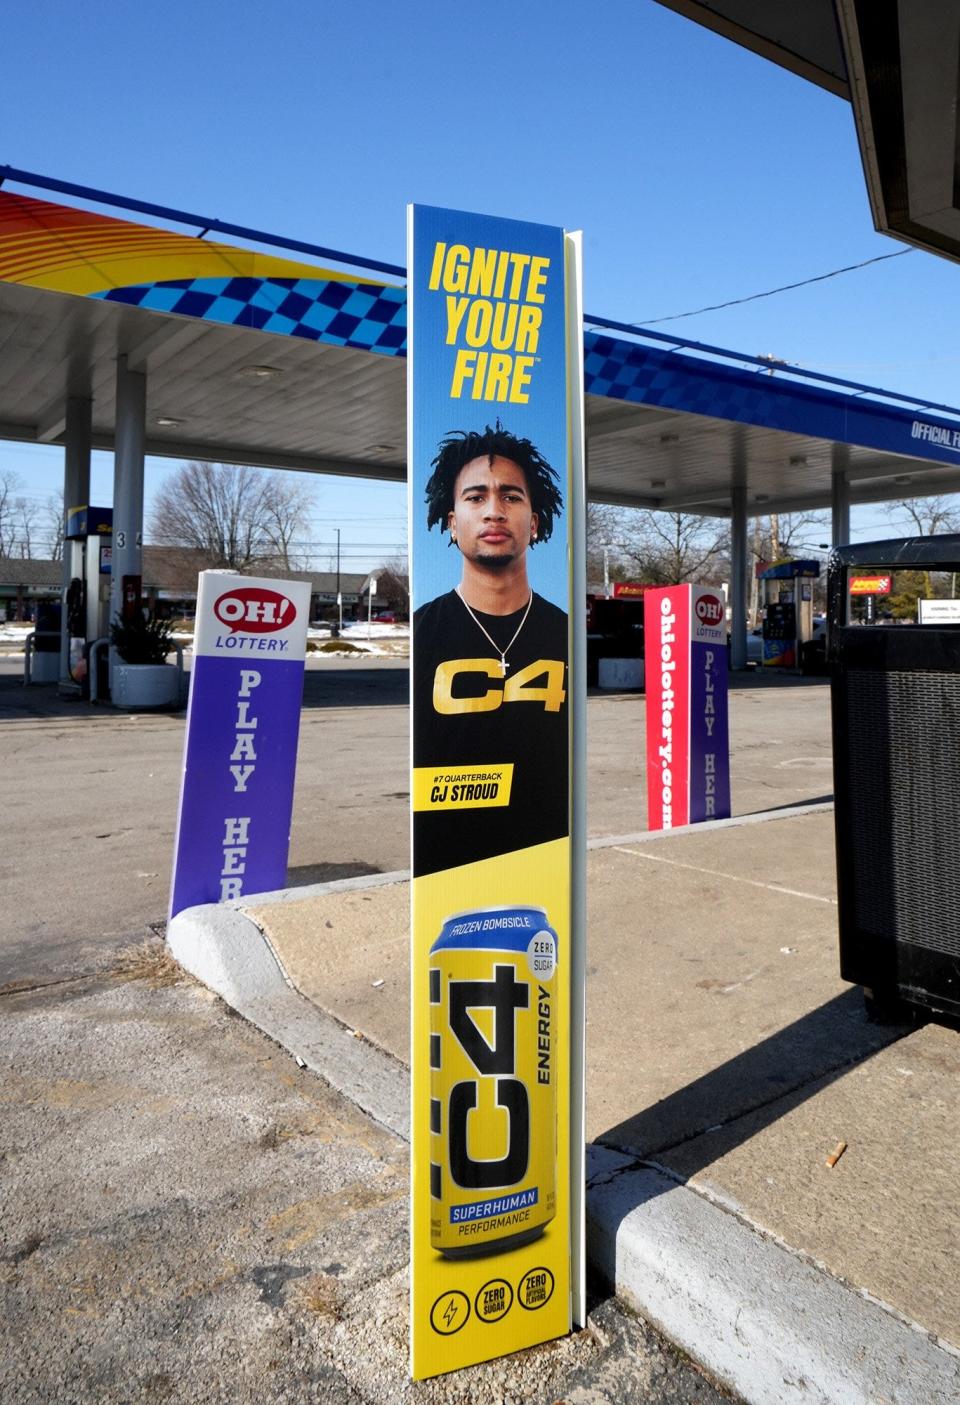 Earlier this year, Ohio State quarterback C.J. Stroud appeared on a C4 Energy drink advertisement at a Sunoco gas station at 5800 Cleveland Ave.